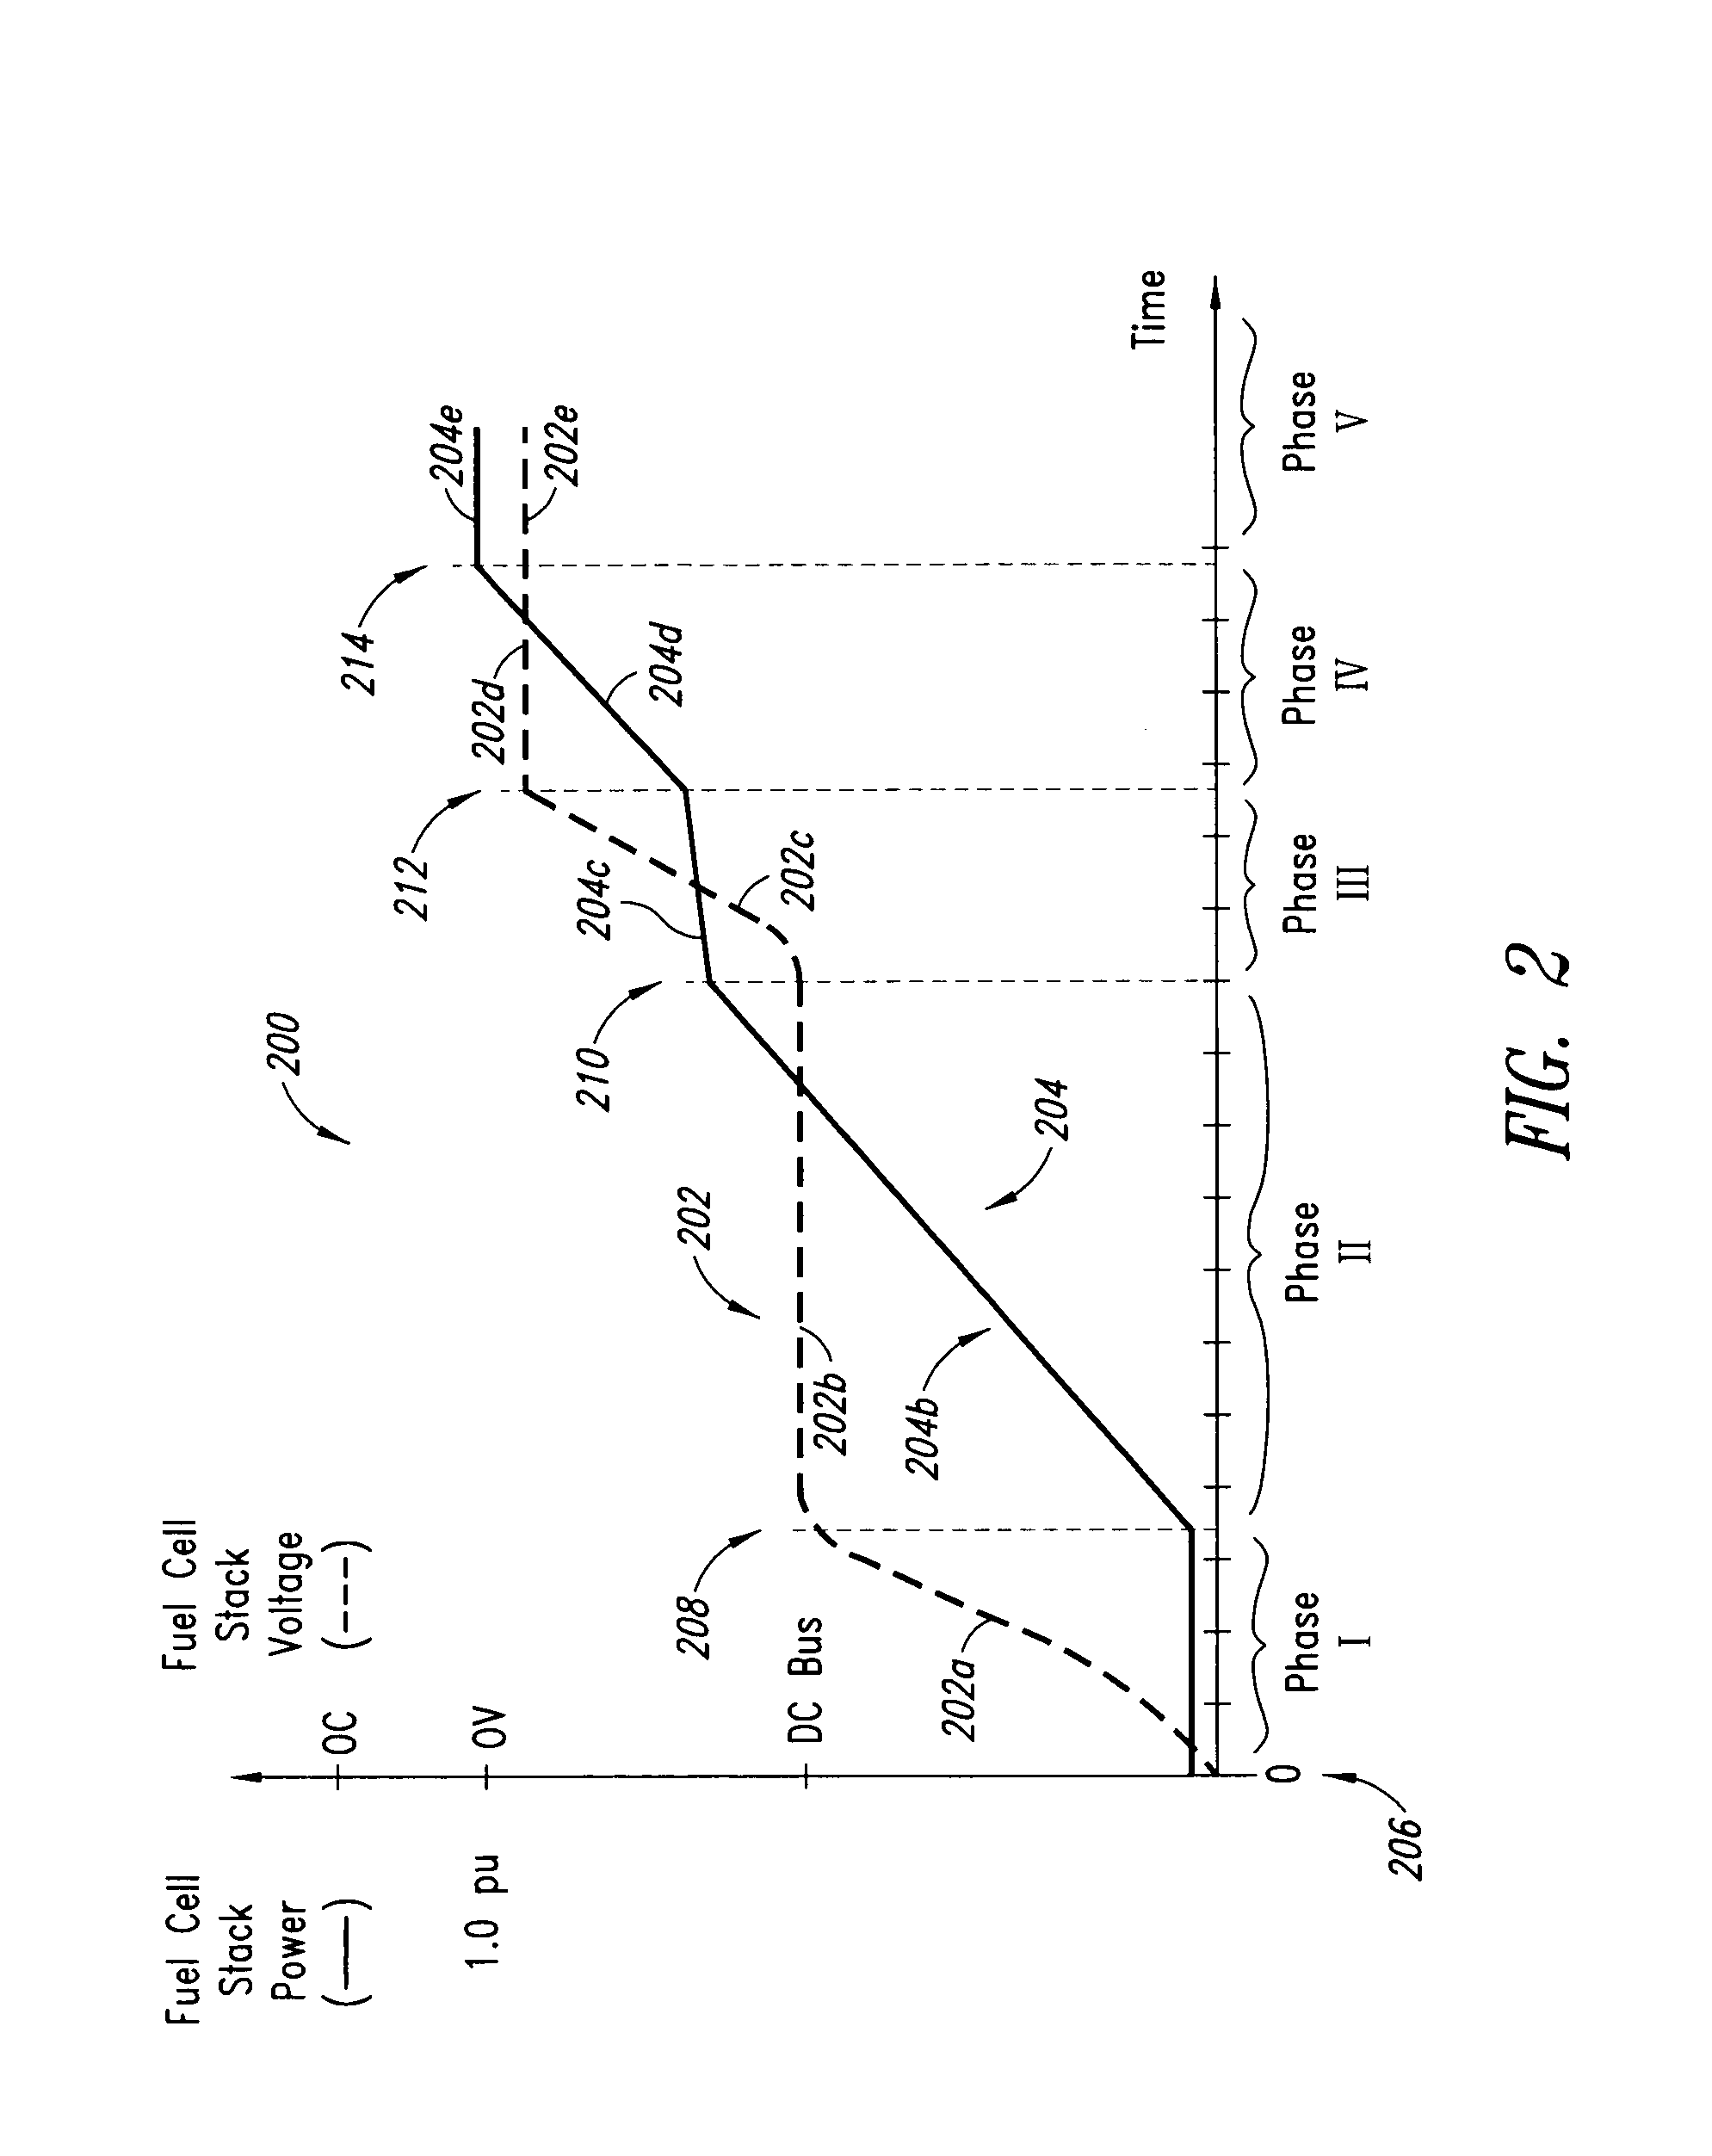 Fuel cell system apparatus